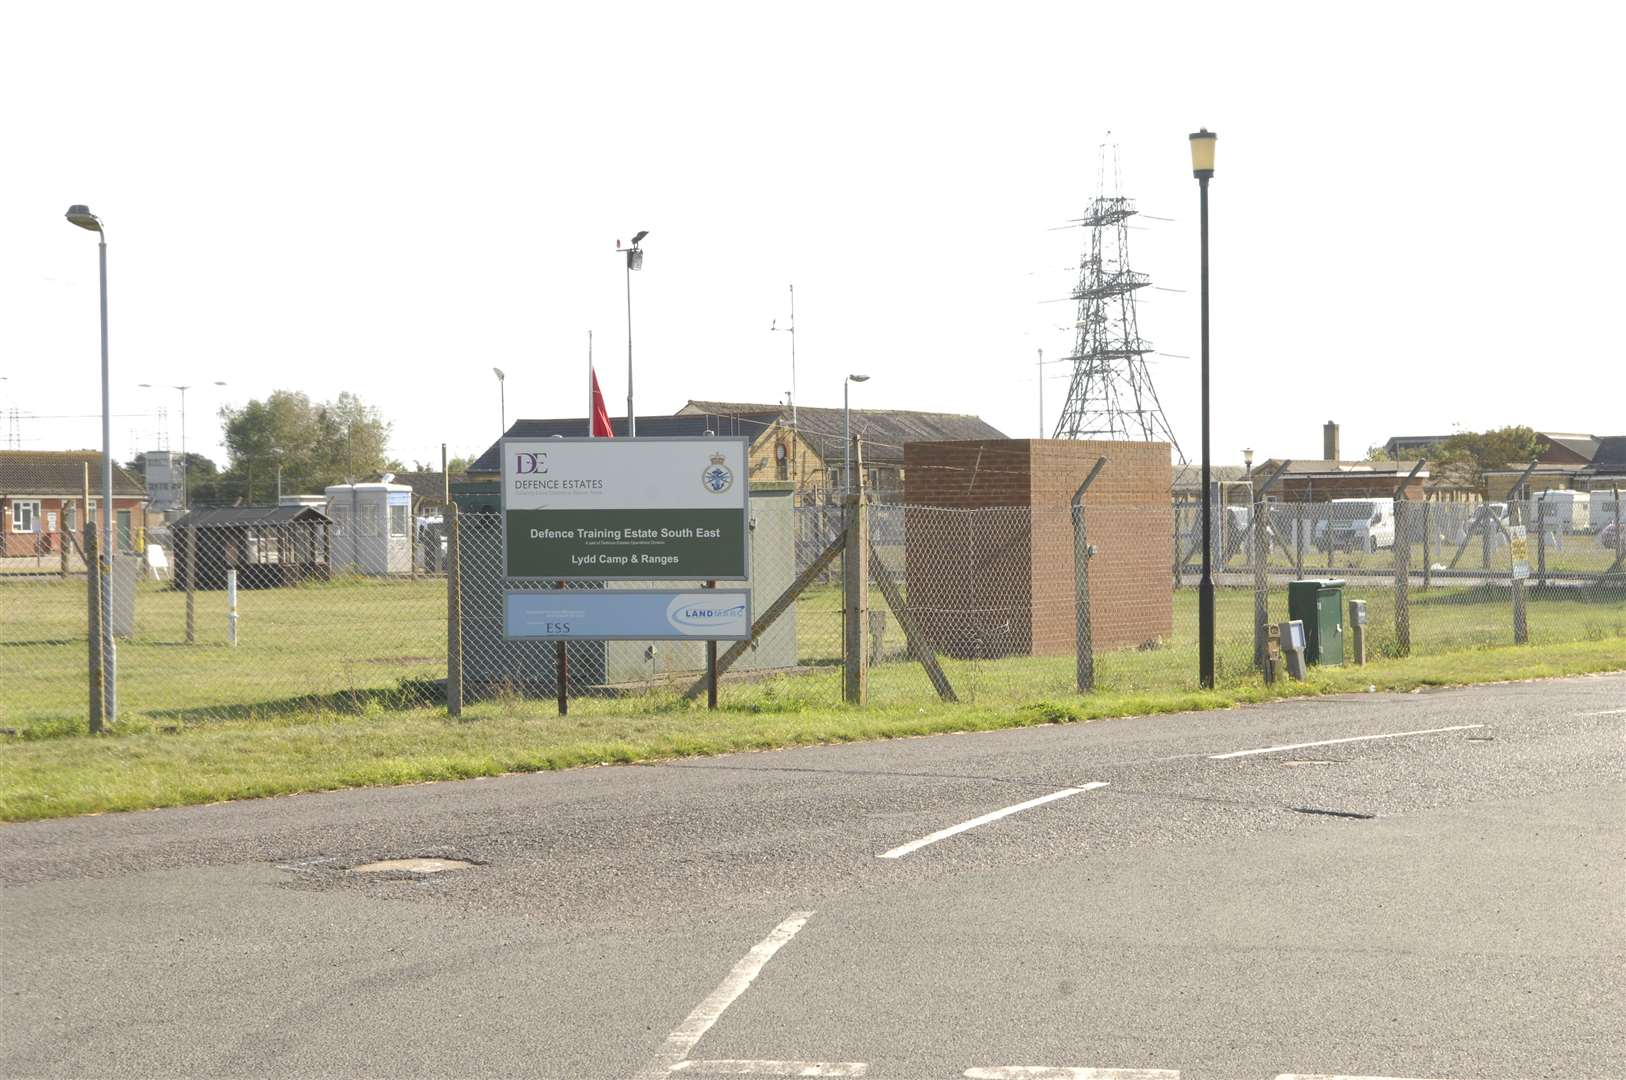 The scheme will help protect the firing ranges at Lydd Ranges